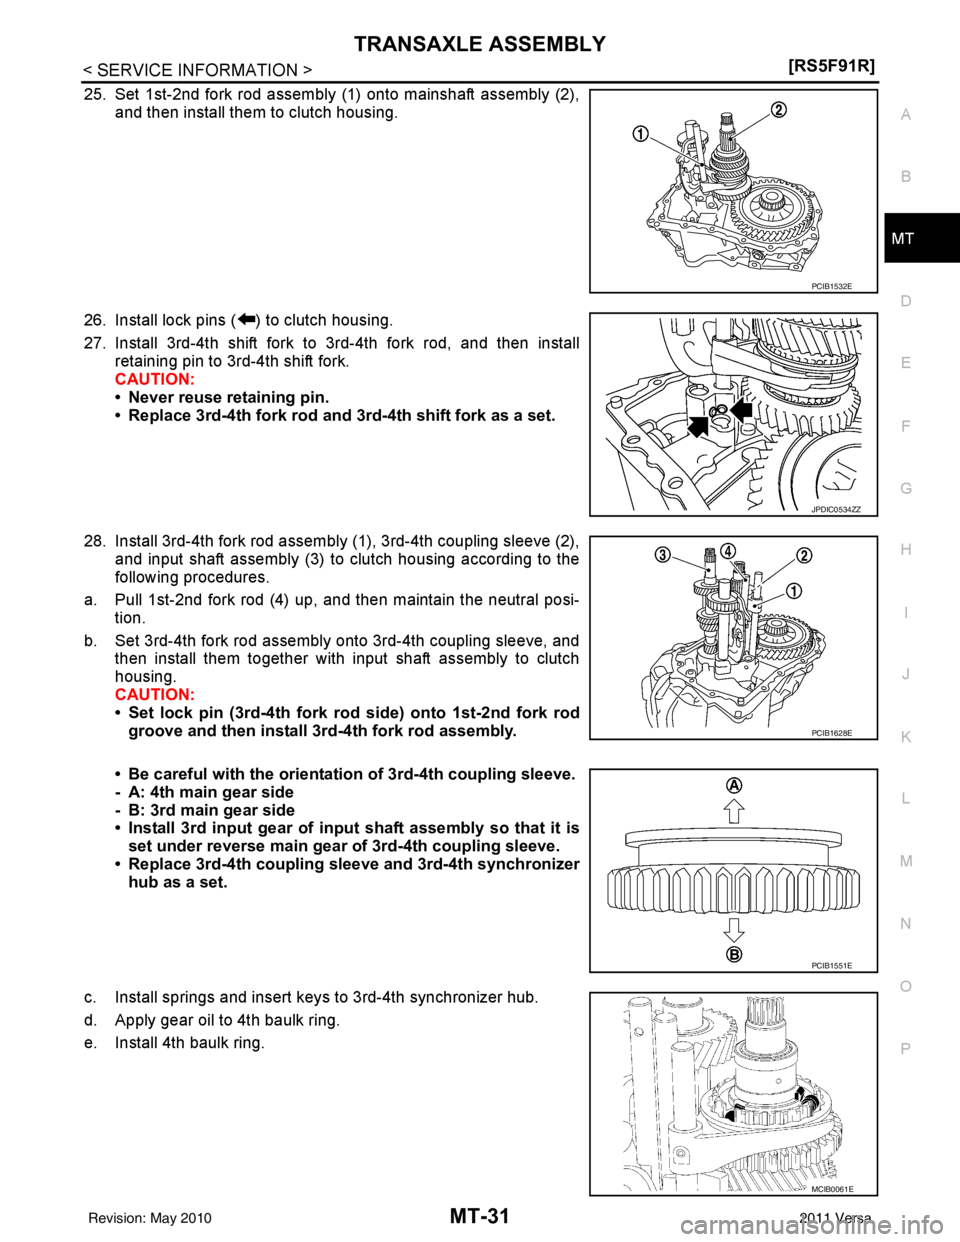 NISSAN LATIO 2011  Service Repair Manual TRANSAXLE ASSEMBLYMT-31
< SERVICE INFORMATION > [RS5F91R]
D
E
F
G H
I
J
K L
M A
B
MT
N
O P
25. Set 1st-2nd fork rod assembly (1) onto mainshaft assembly (2), and then install them to clutch housing.
2